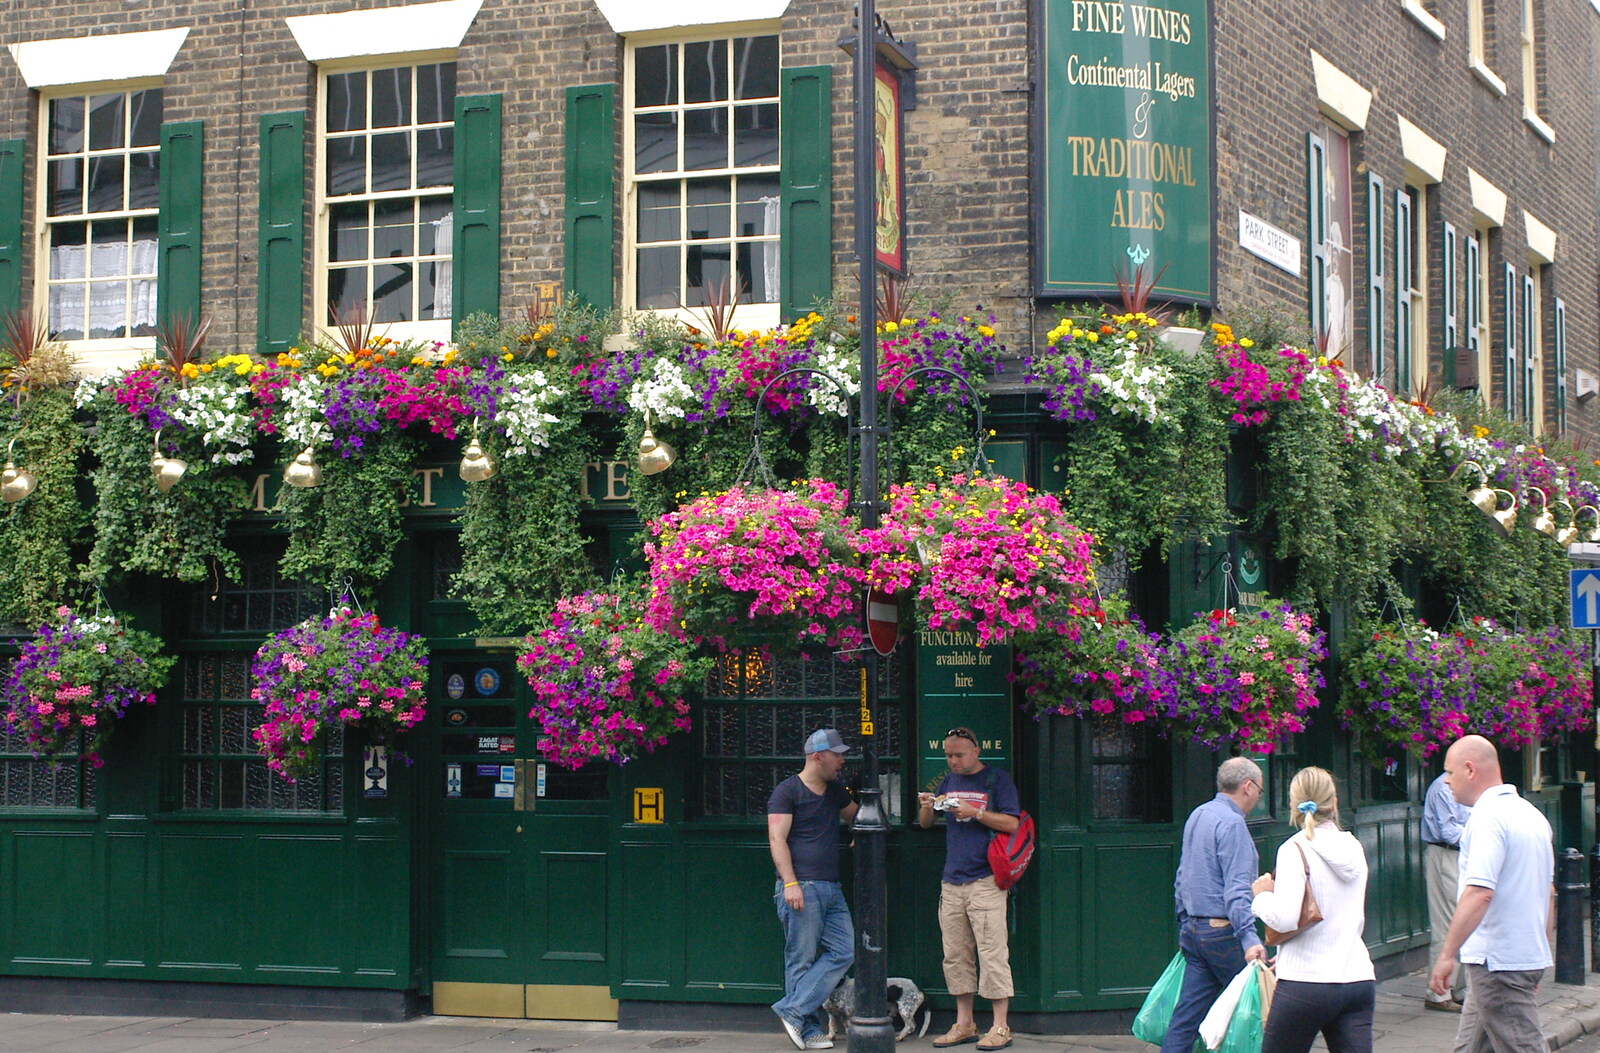 Impressive hanging-baskets outside a pub from Borough Market and North Clapham Tapas, London - 23rd July 2005